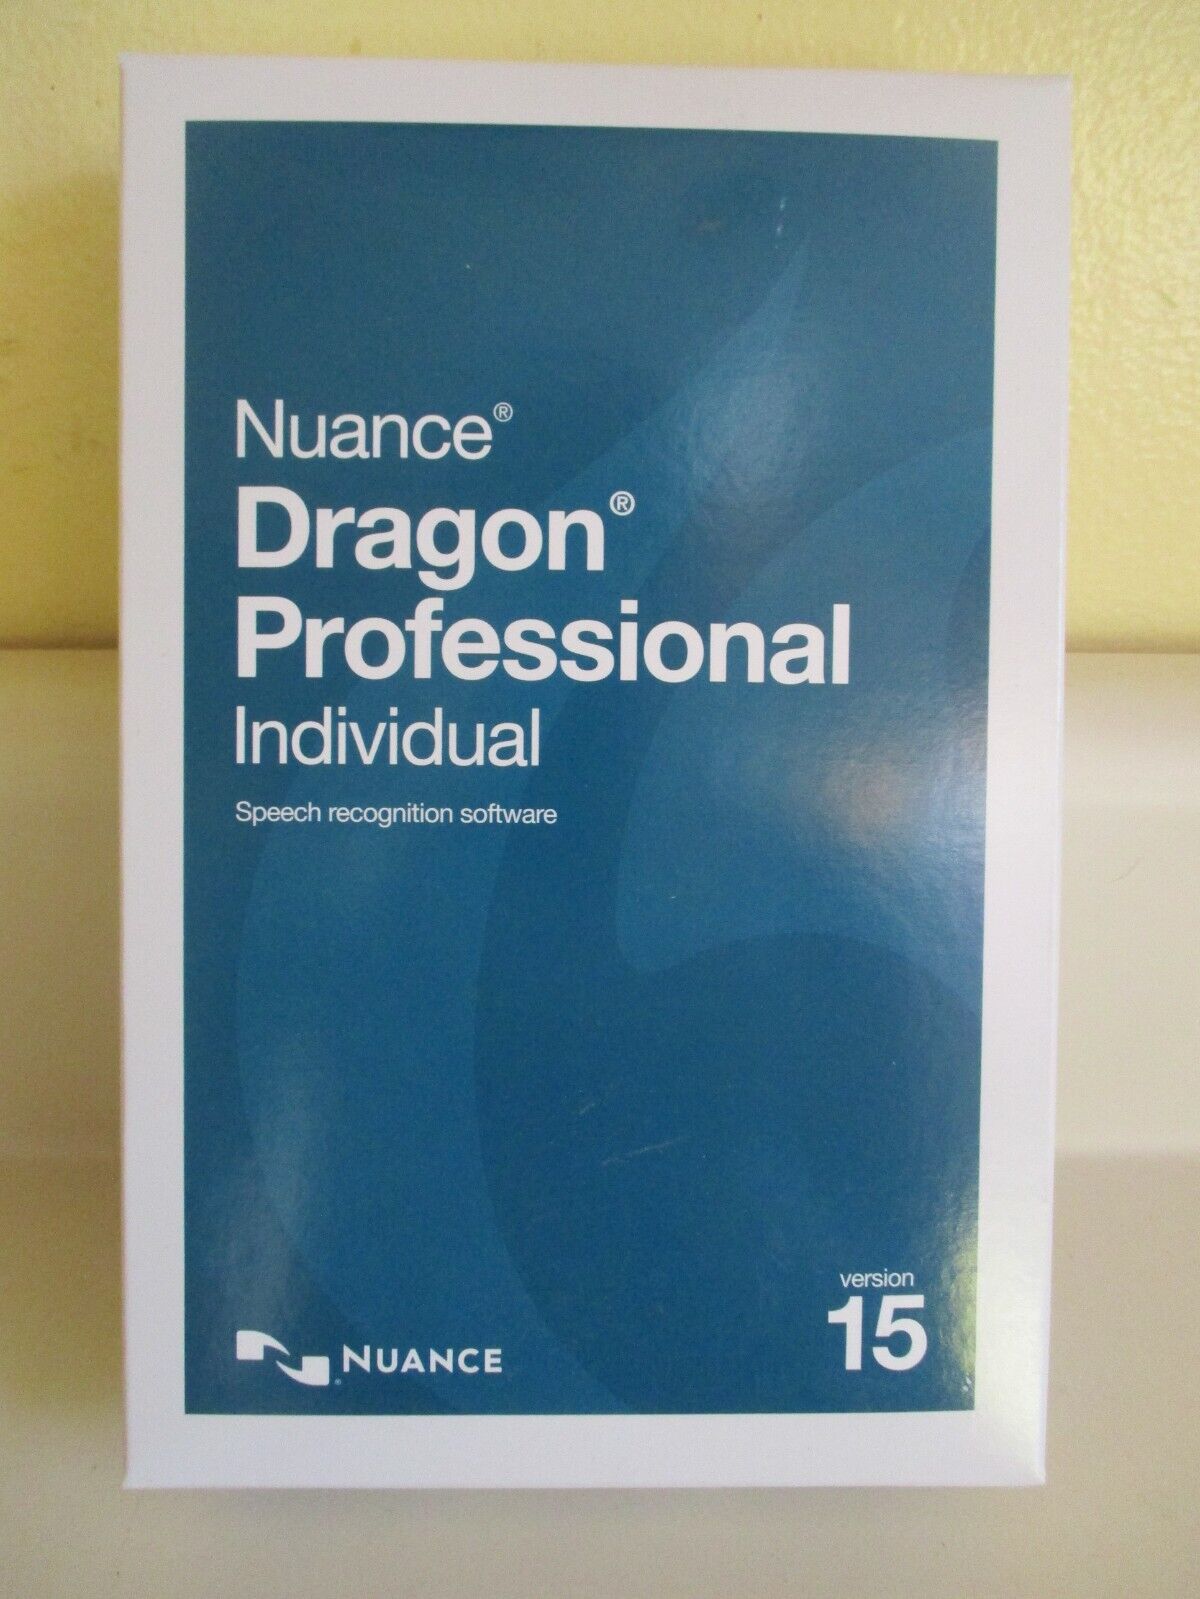 Nuance Dragon Professional Individual 15 - New Retail Box, K809A-GG4-15.0